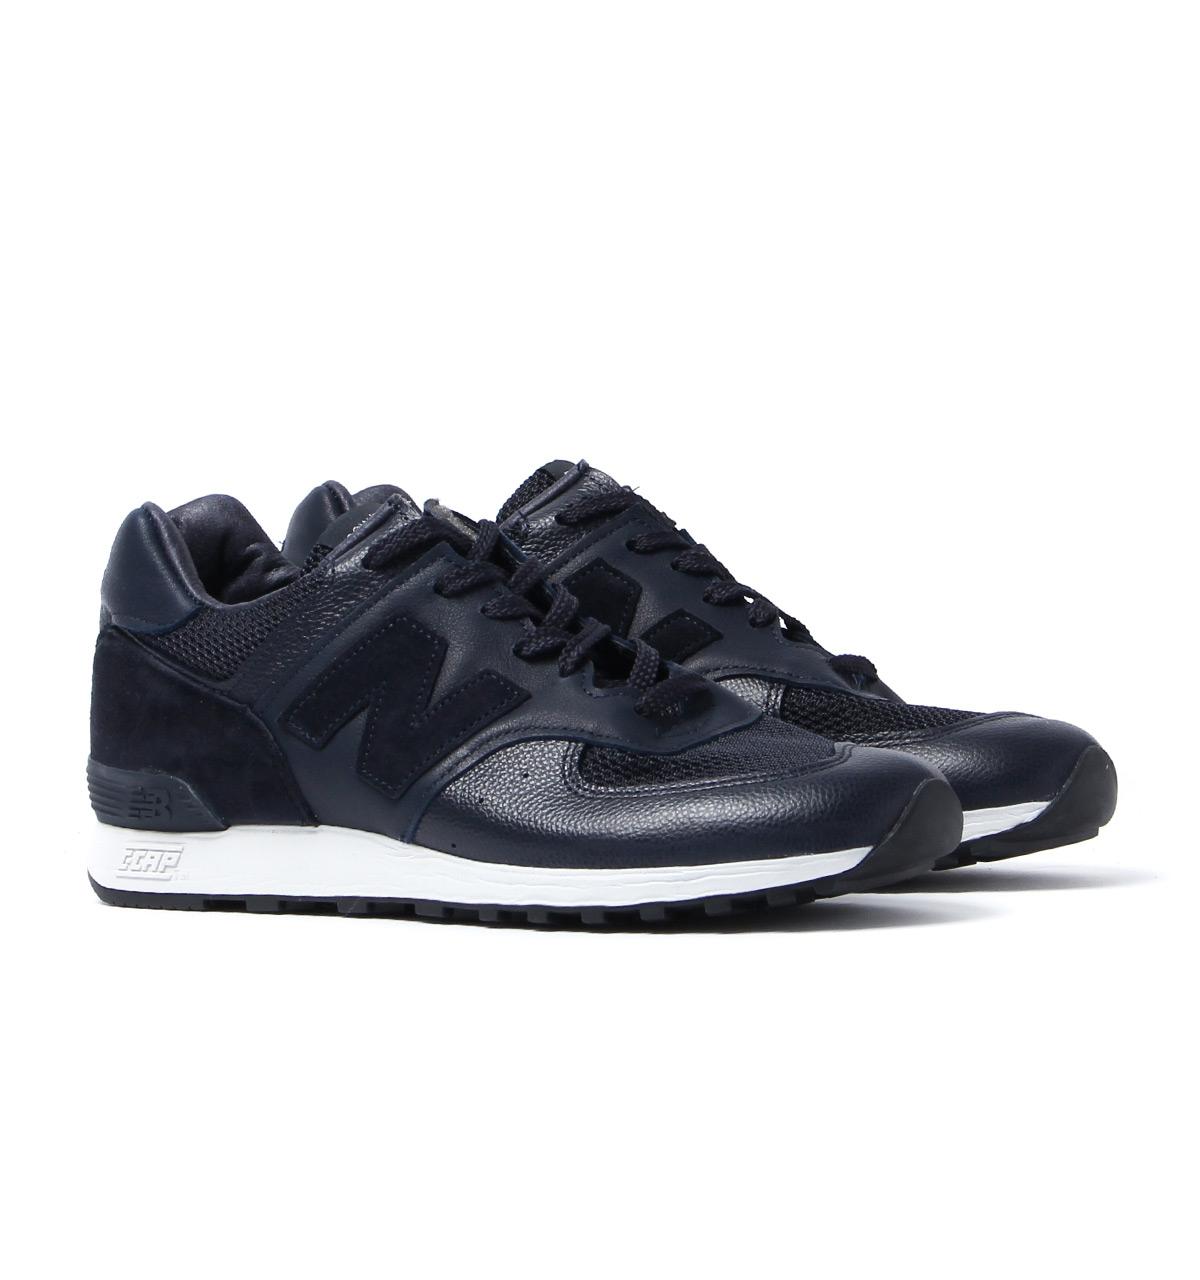 new balance 576 made in england deep navy leather trainers